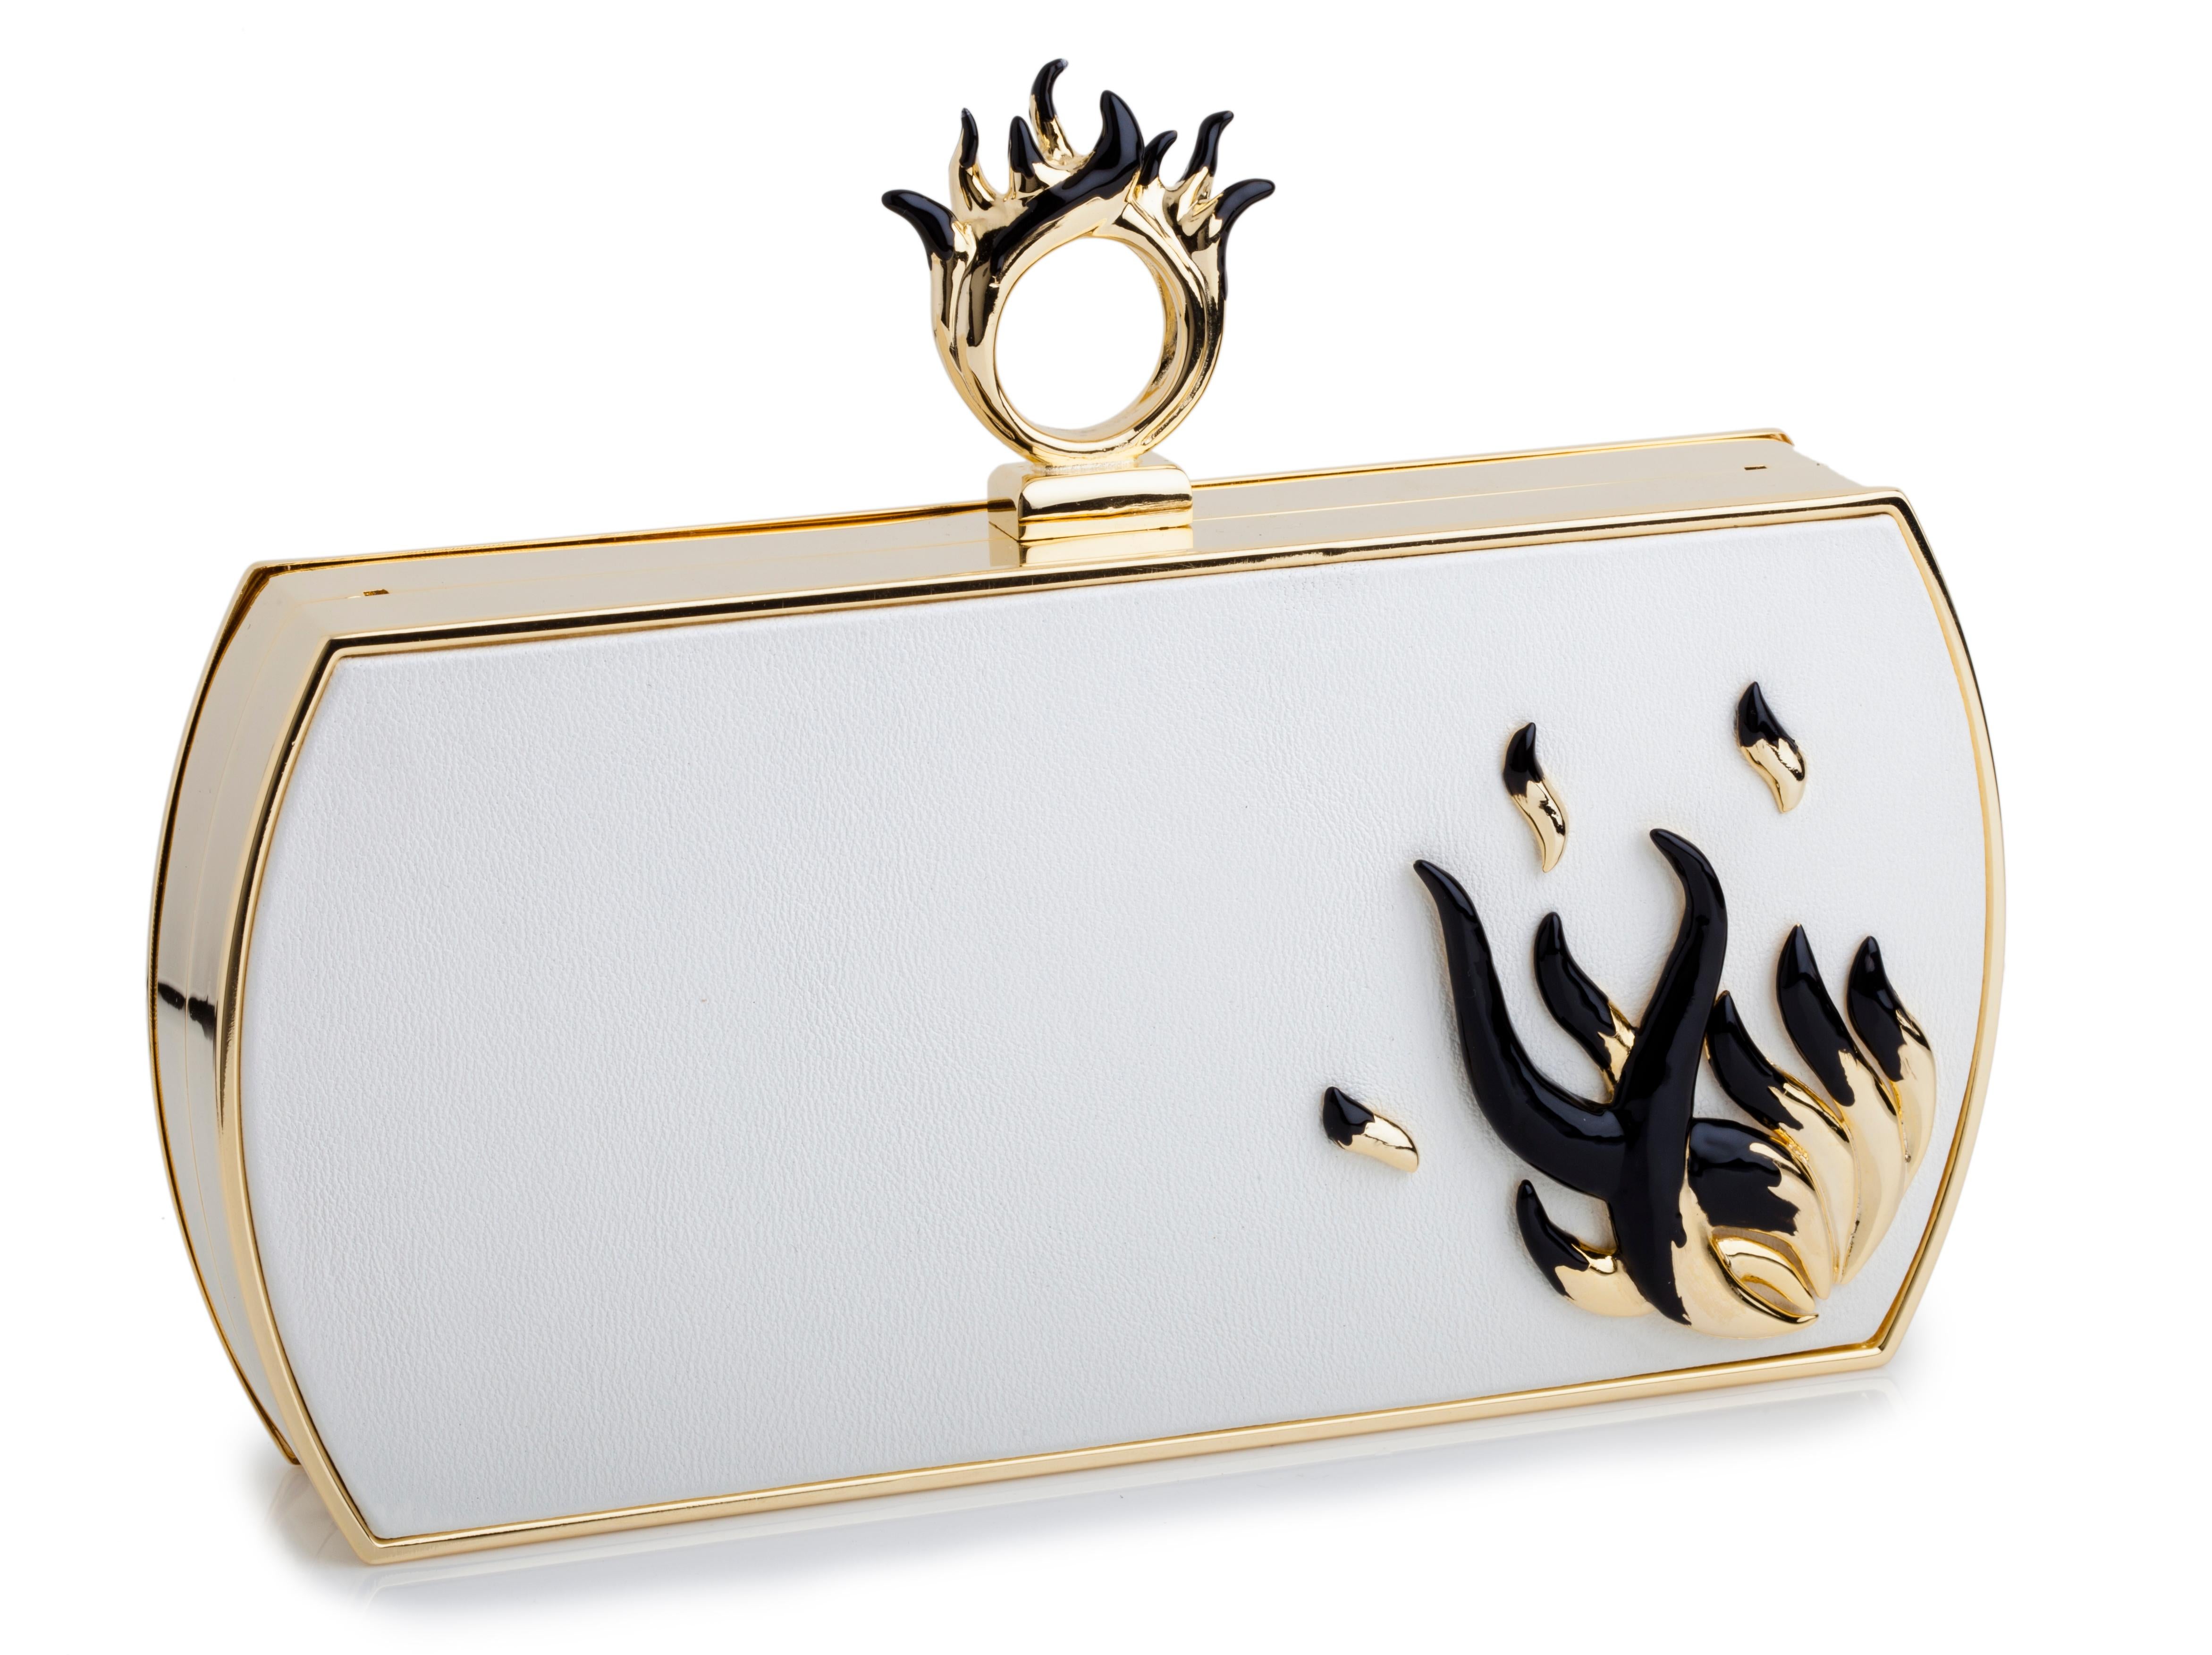 Bochic “Gilda” Jeweled clutch. 
The “Gilda” clutch in honor of the beautiful, alluring and provocative Rita Hayworth in the 1946 romantic drama “Gilda”. A seductive and 
desirable woman, who knows what she wants and how to achieve it. 
This clutch